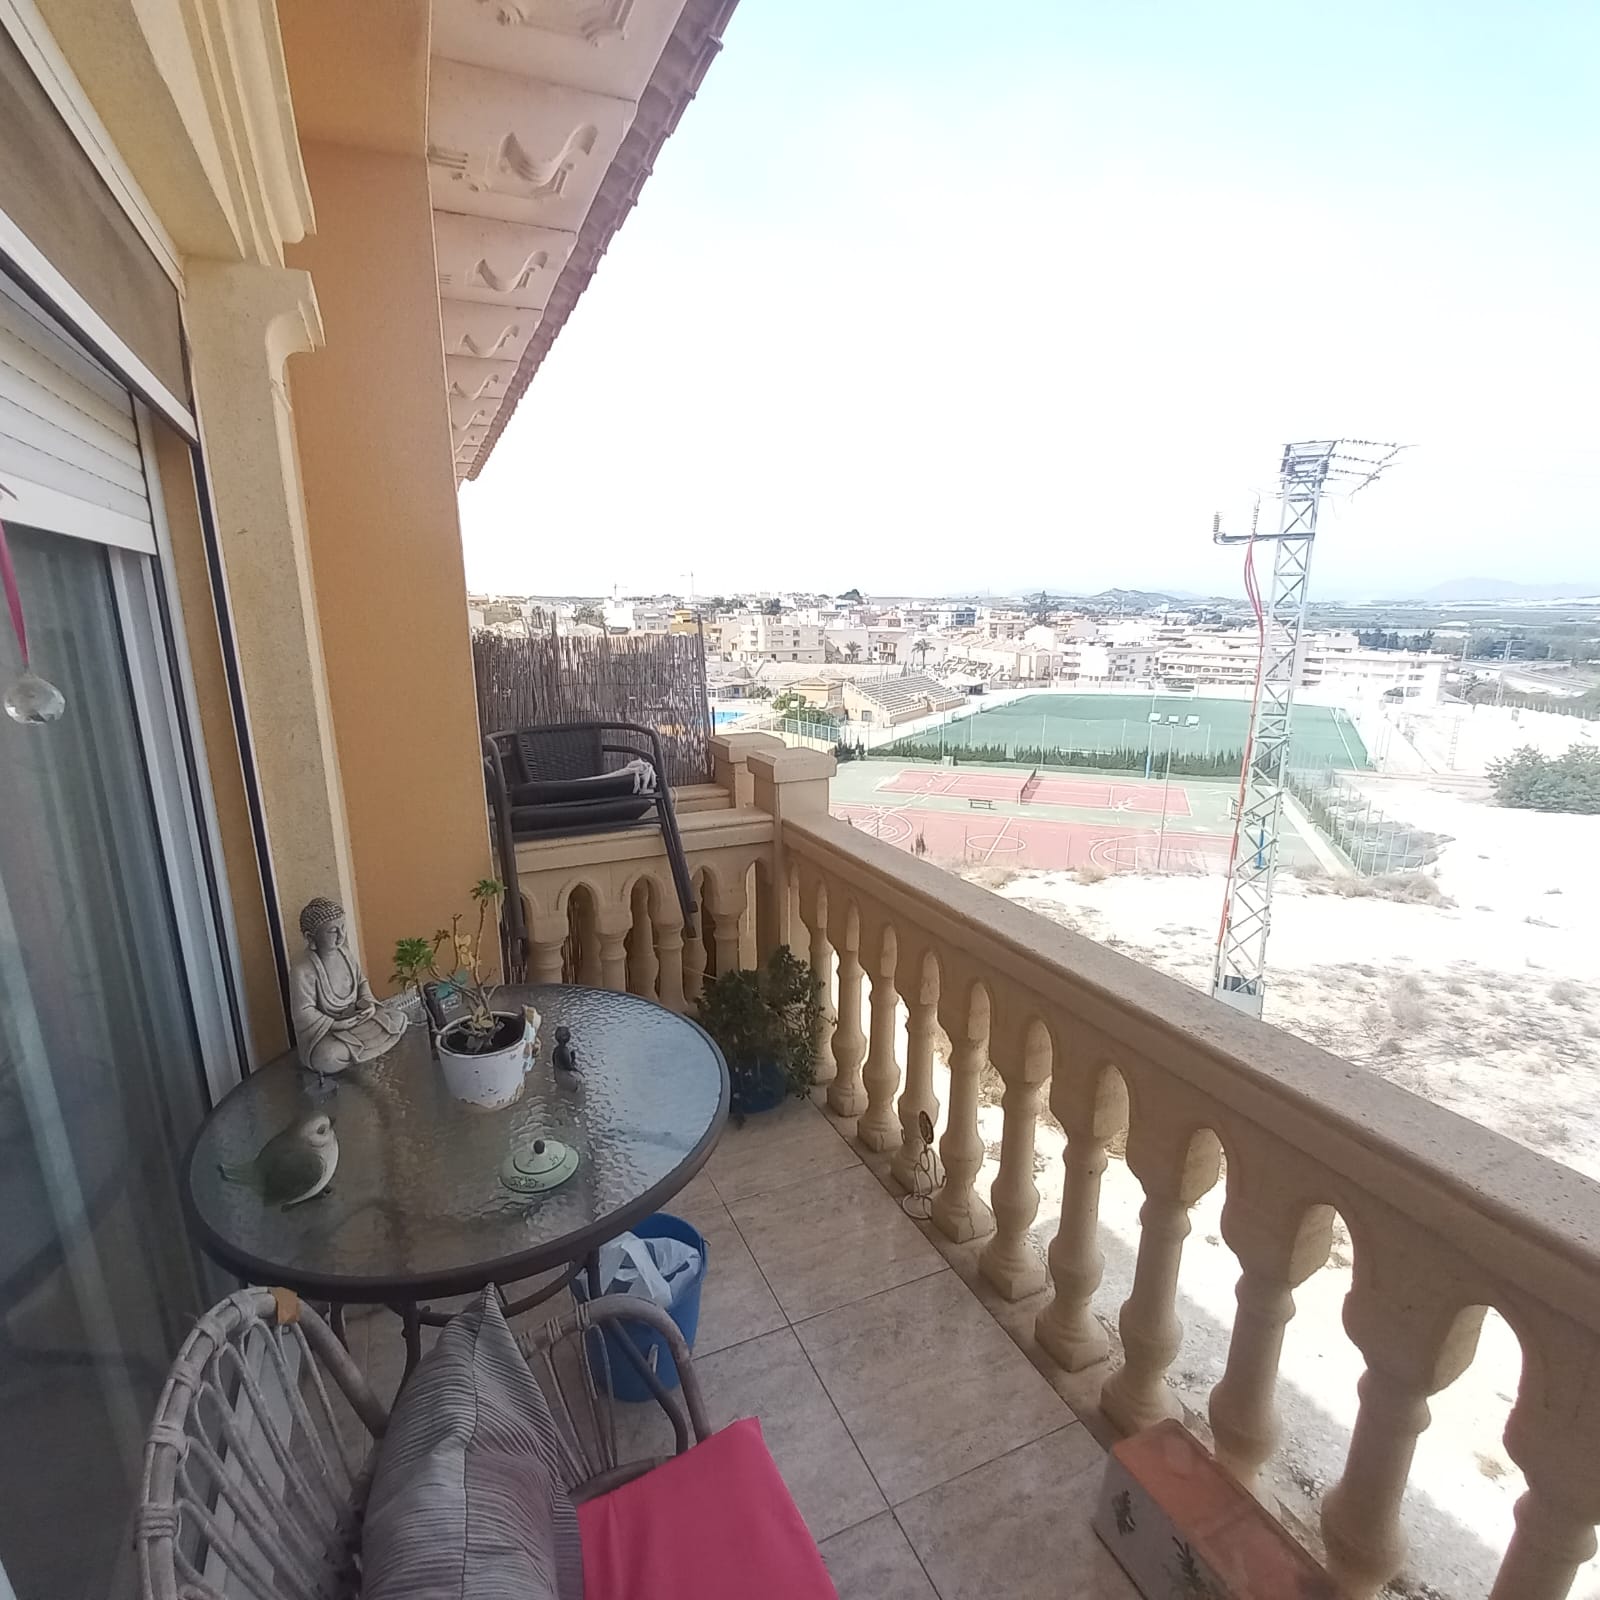 2043D: Apartment for sale in San Miguel